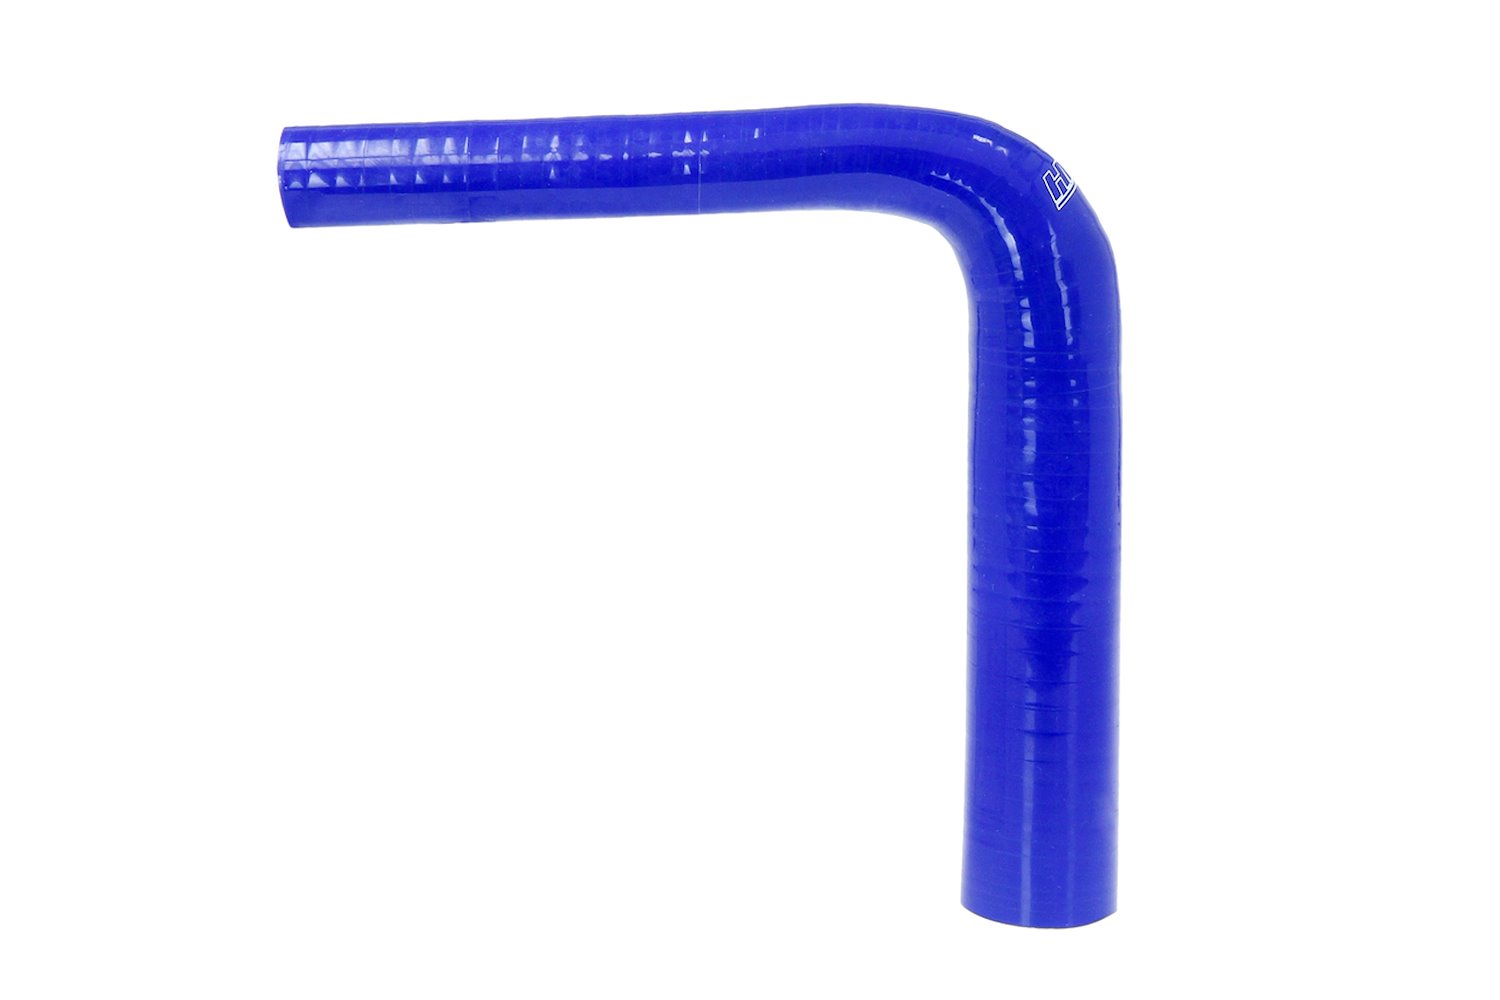 HTSER90-062-075-BLUE Silicone 90-Degree Elbow Hose, High-Temp 4-Ply Reinforced, 5/8 in. - 3/4 in. ID, Blue